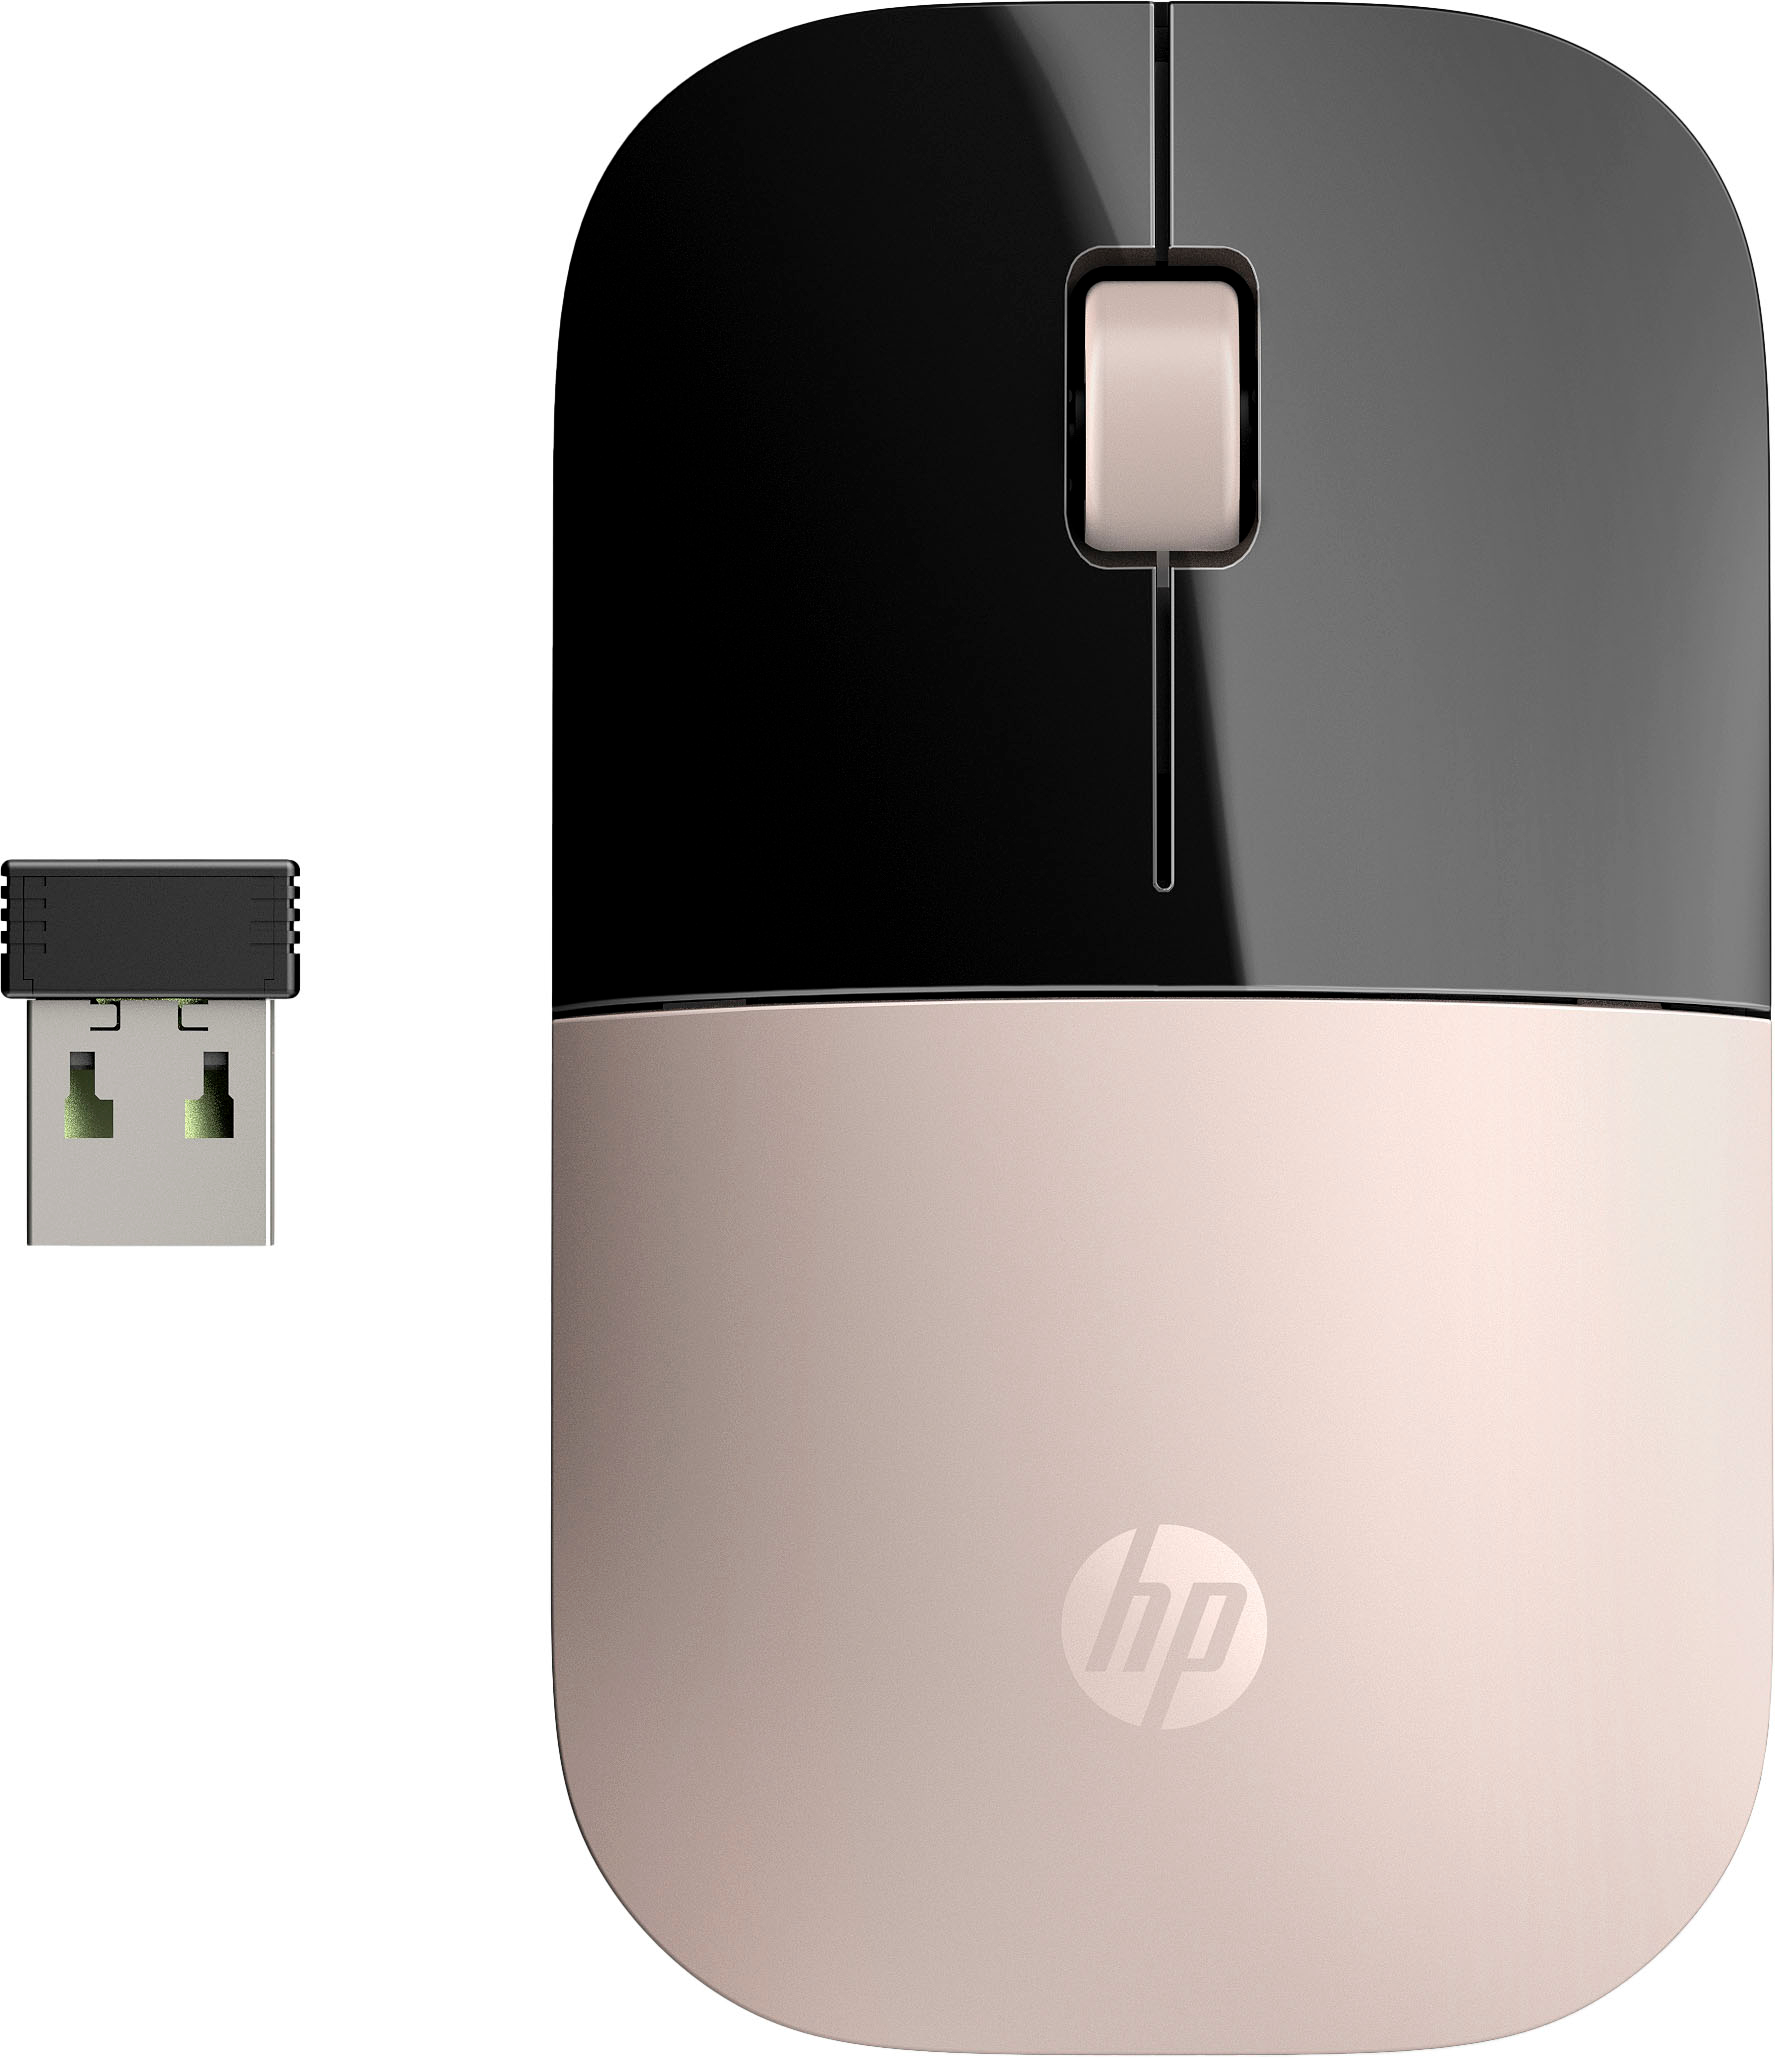 Advance sale Flash vitamin HP Z3700 G2 Wireless Optical Ambidextrous Mouse Rose Gold 66Z12AA#ABL -  Best Buy